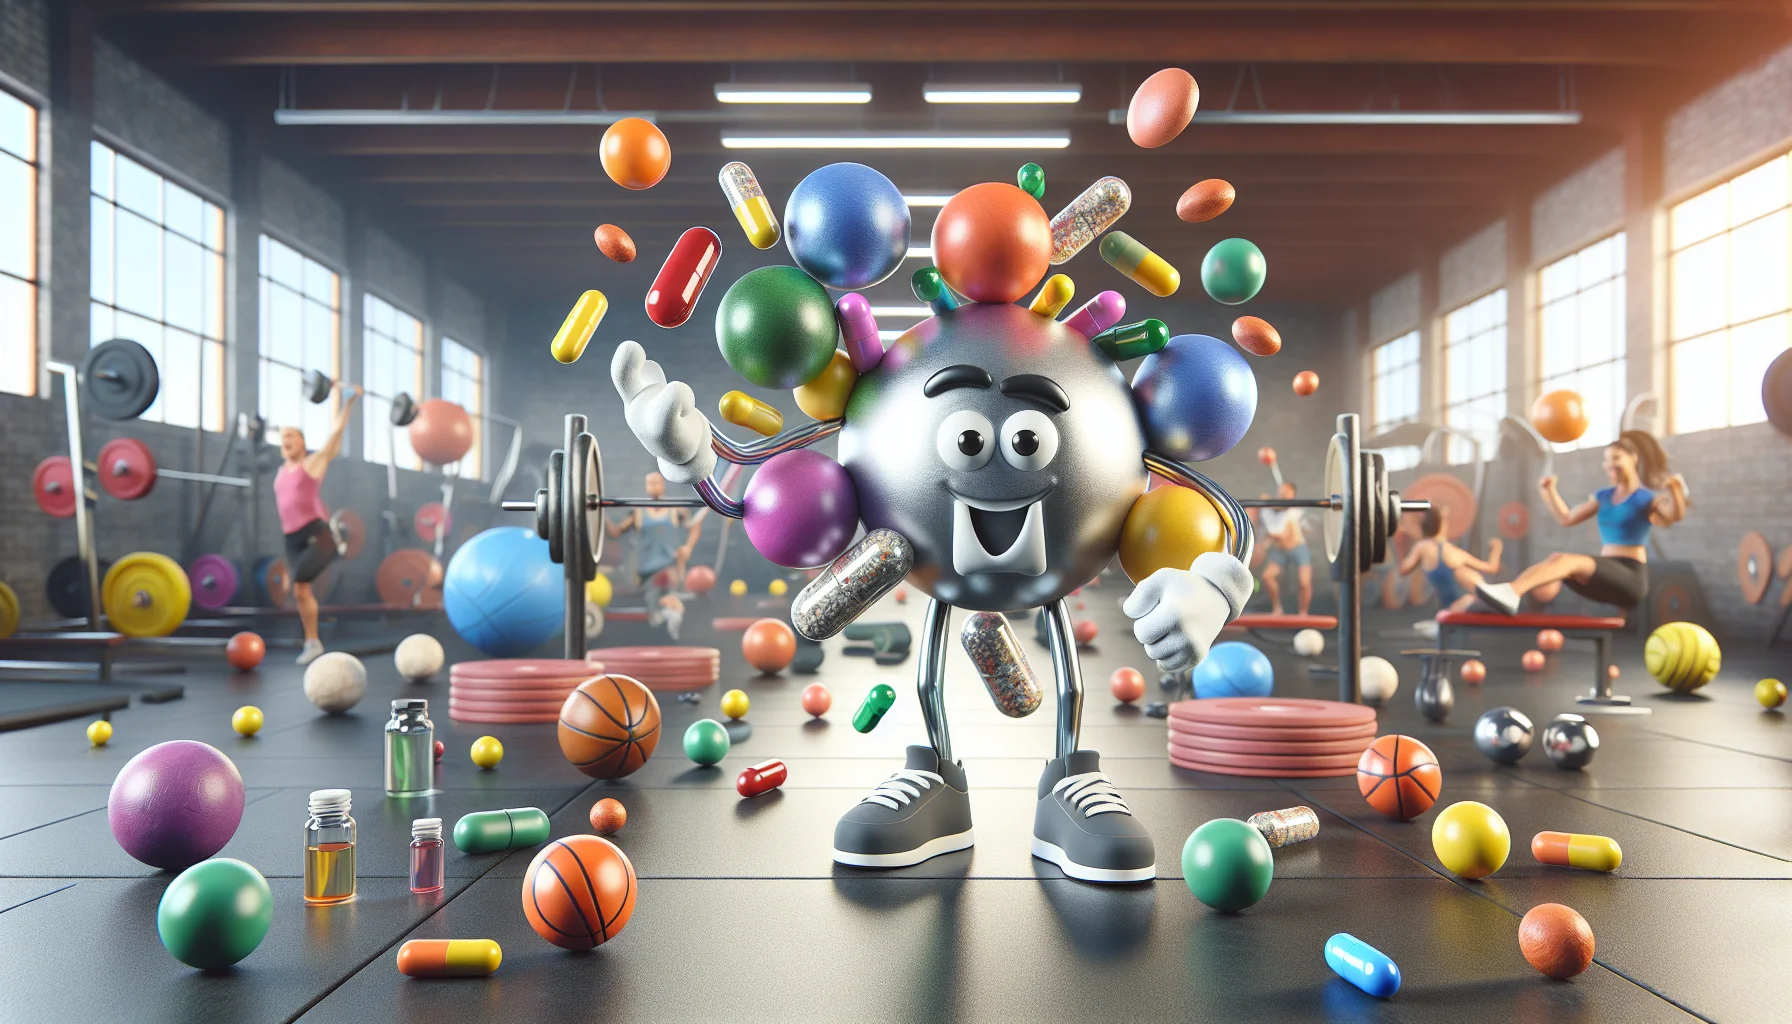 Craft a realistic image featuring an energized magnesium atom character surrounded by abstract representations of vitamins, essential minerals, and other key components of sports supplements. This scene should be amusing and approachable, with the magnesium atom showing expressive, comic facial features and sporting a strong physique, demonstrating strength and agility, while juggling colorful sports balls. The surroundings should capture a lively gym environment, with weights and equipment subtly shaped like supplement capsules. Incorporate lovingly exaggerated, cartoony aesthetics to encapsulate the fun and engaging nature of the scene.